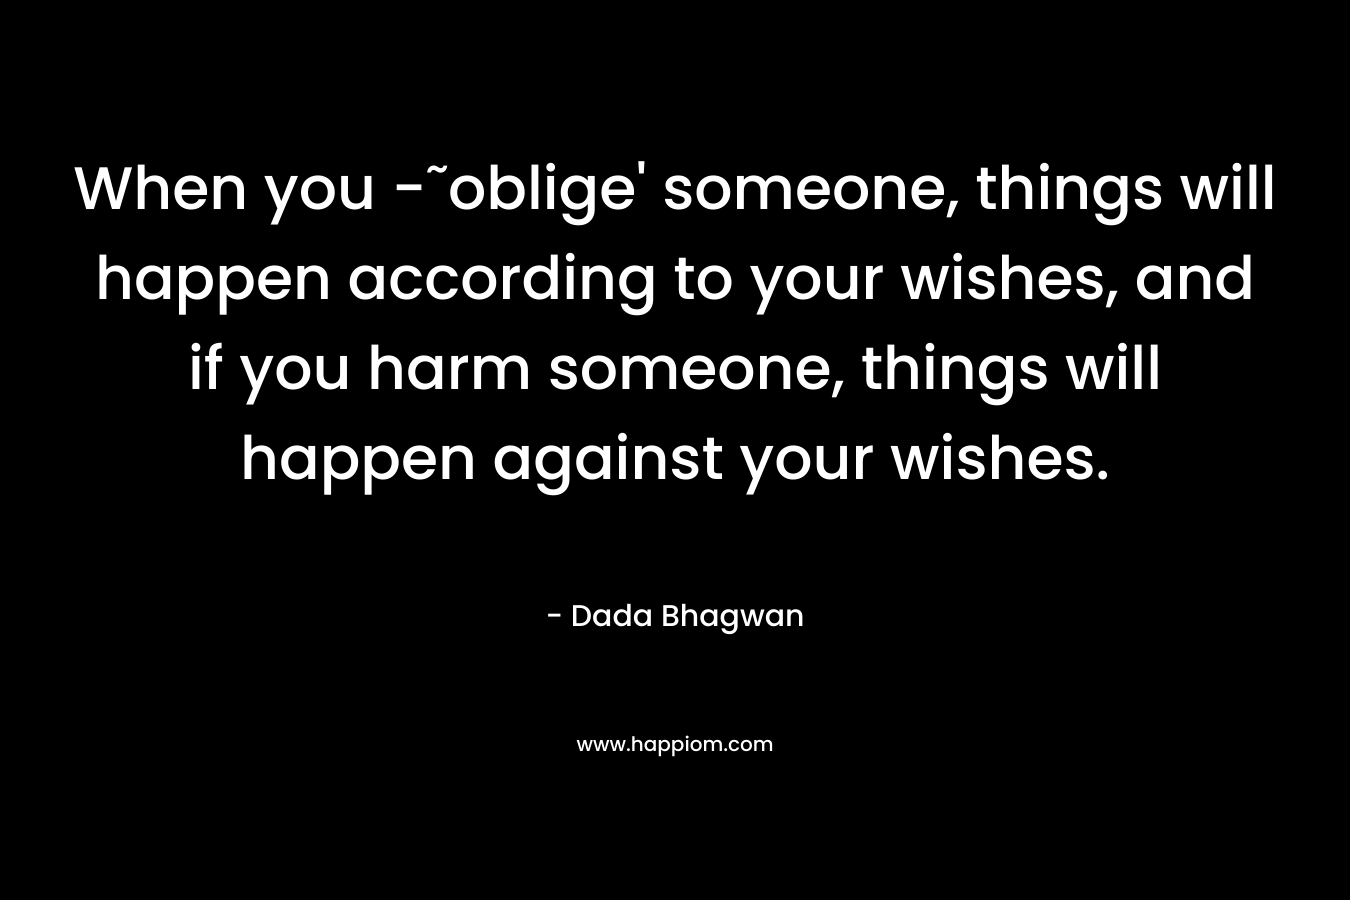 When you -˜oblige' someone, things will happen according to your wishes, and if you harm someone, things will happen against your wishes.